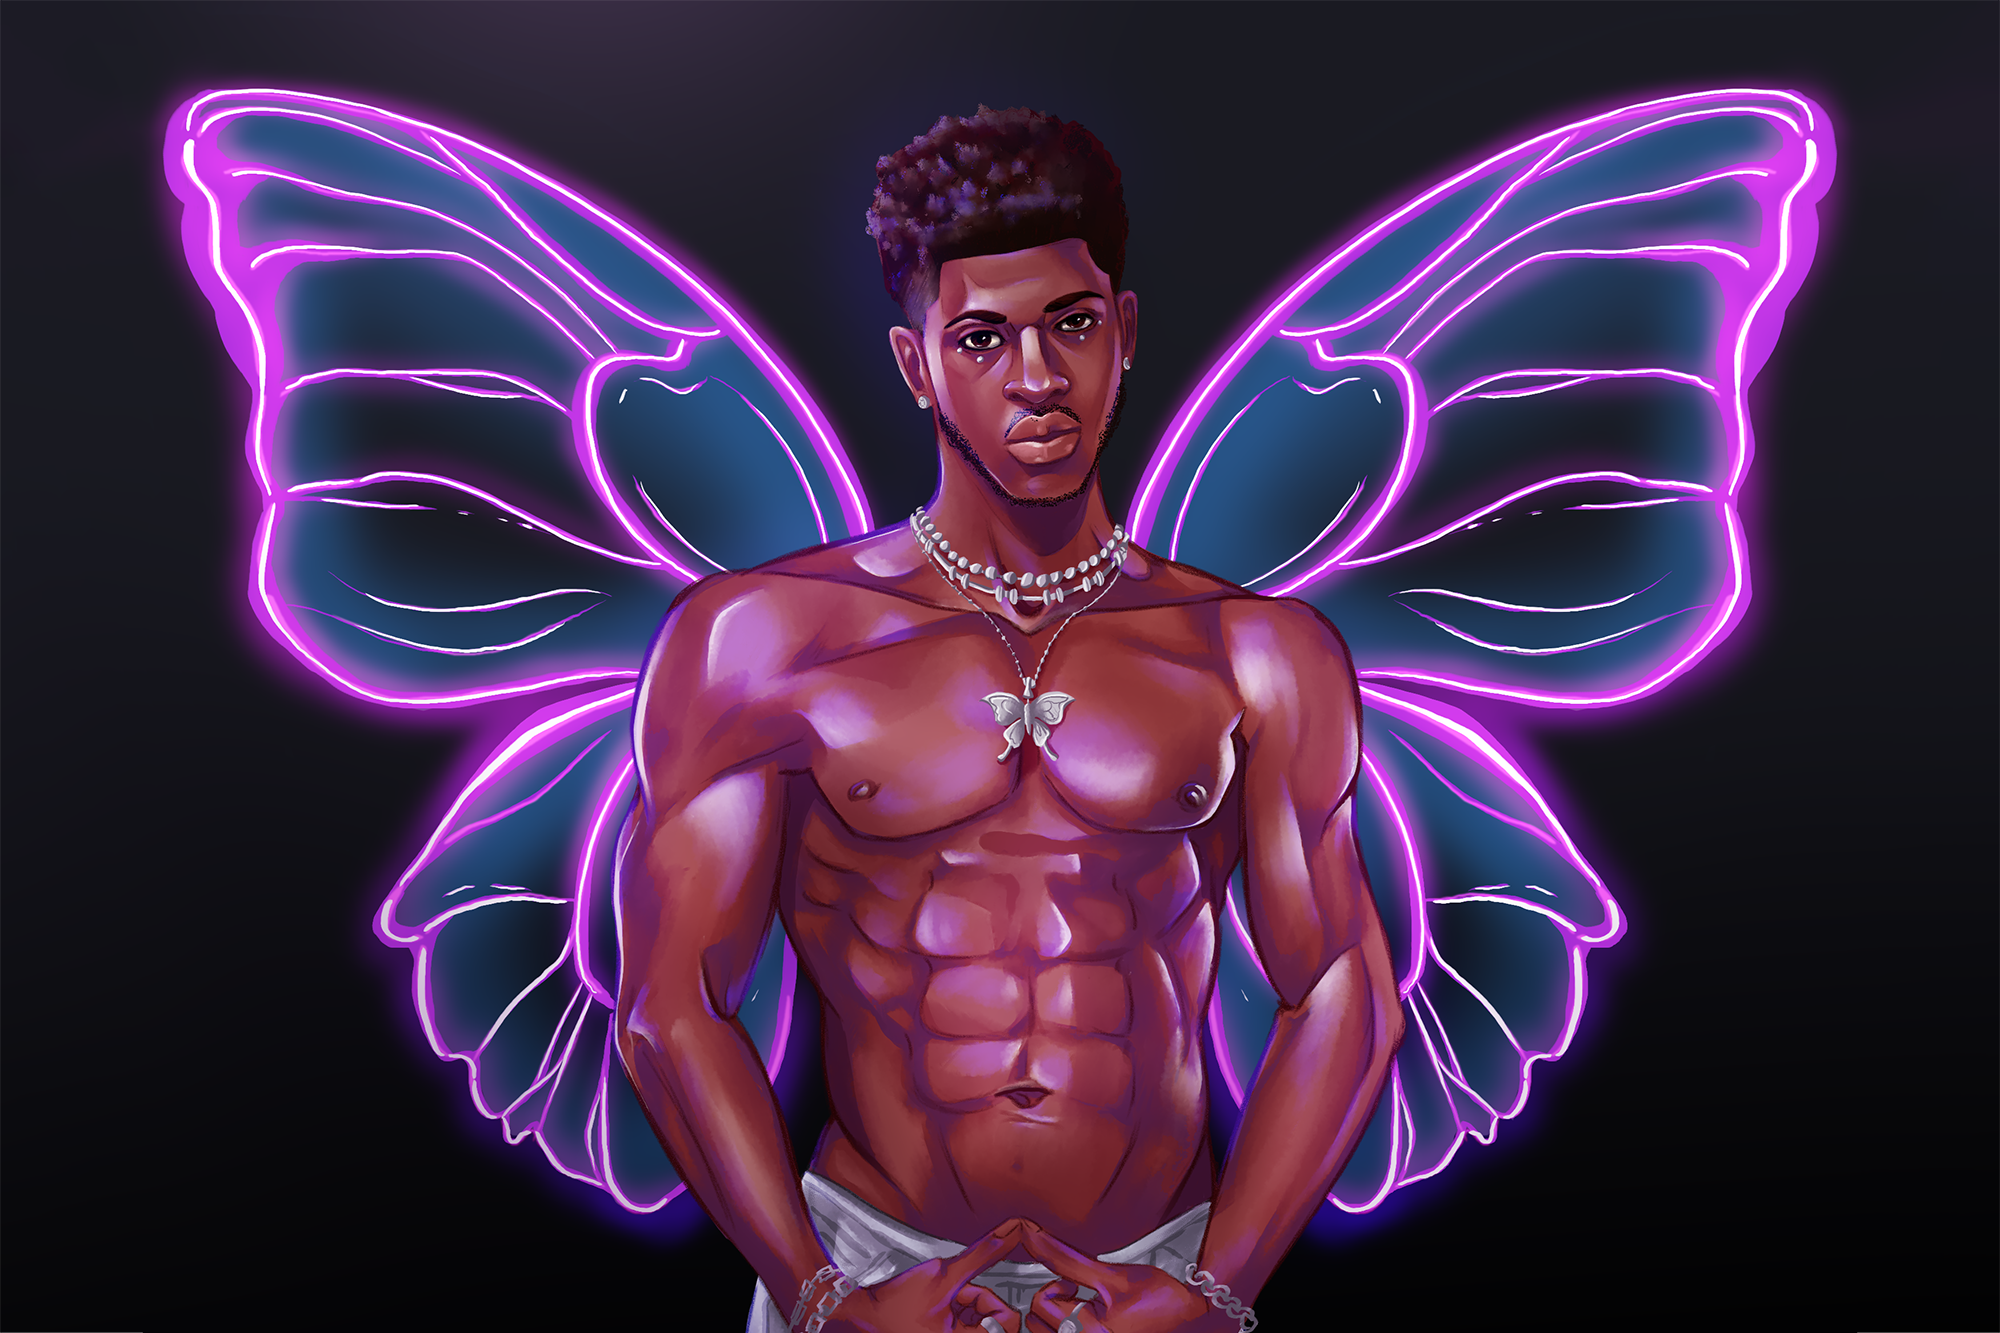 An original digitally painted portrait tribute to Lil Nas X by Sarah Black. Lil Nas is shirtless, looking toward the viewer, wearing a butterfly necklace, with great big neon-purple butterfly wings on his back. 